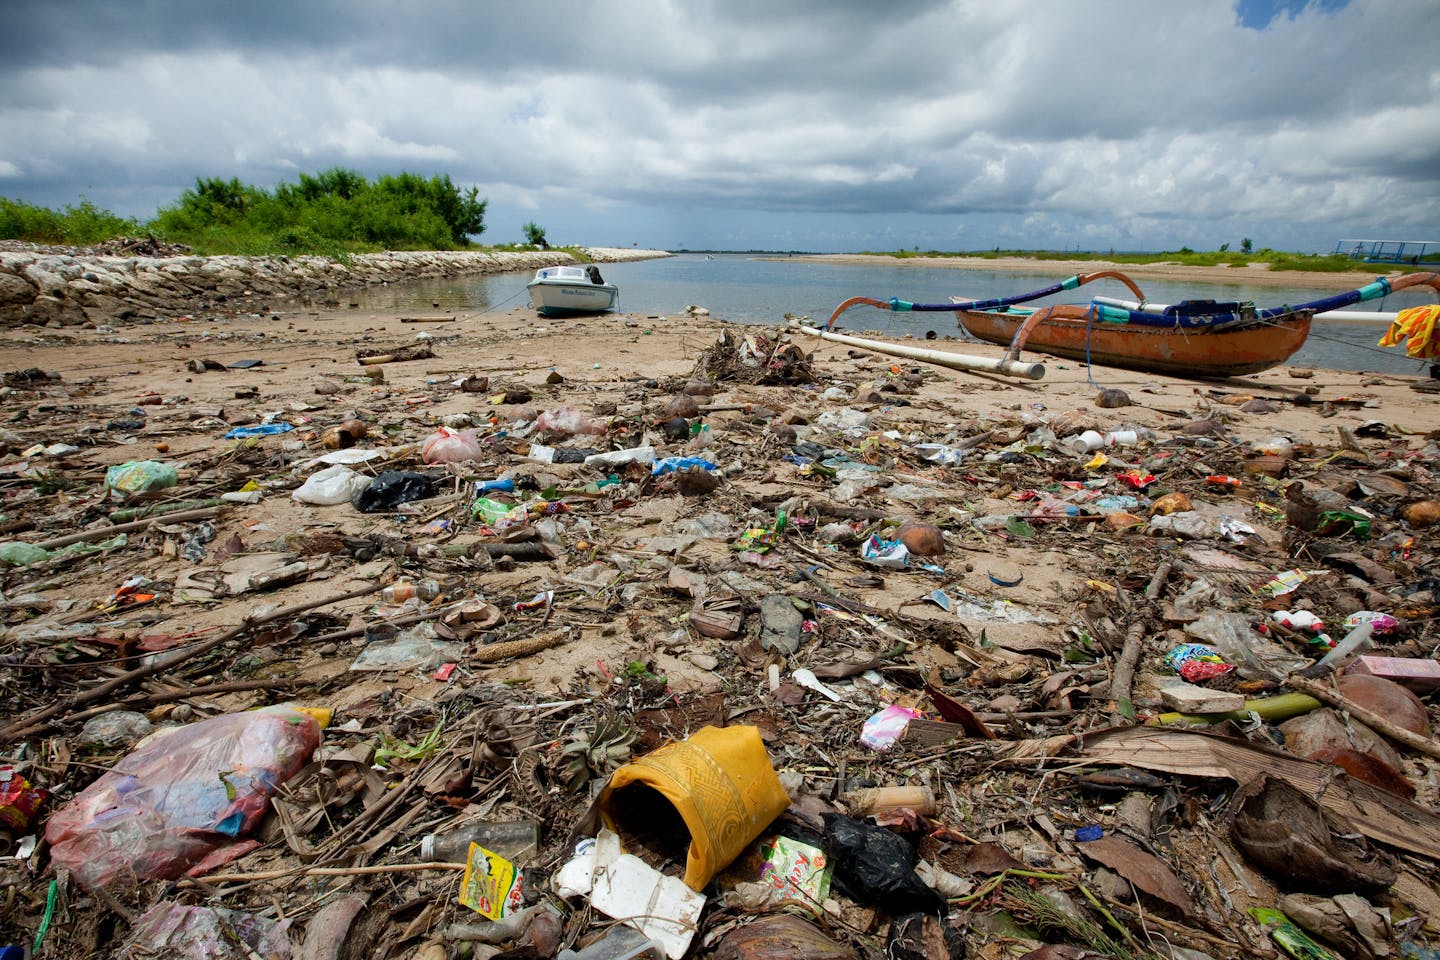 As world goes under plastic waste, UN to hammer out global treaty | News |  Eco-Business | Asia Pacific